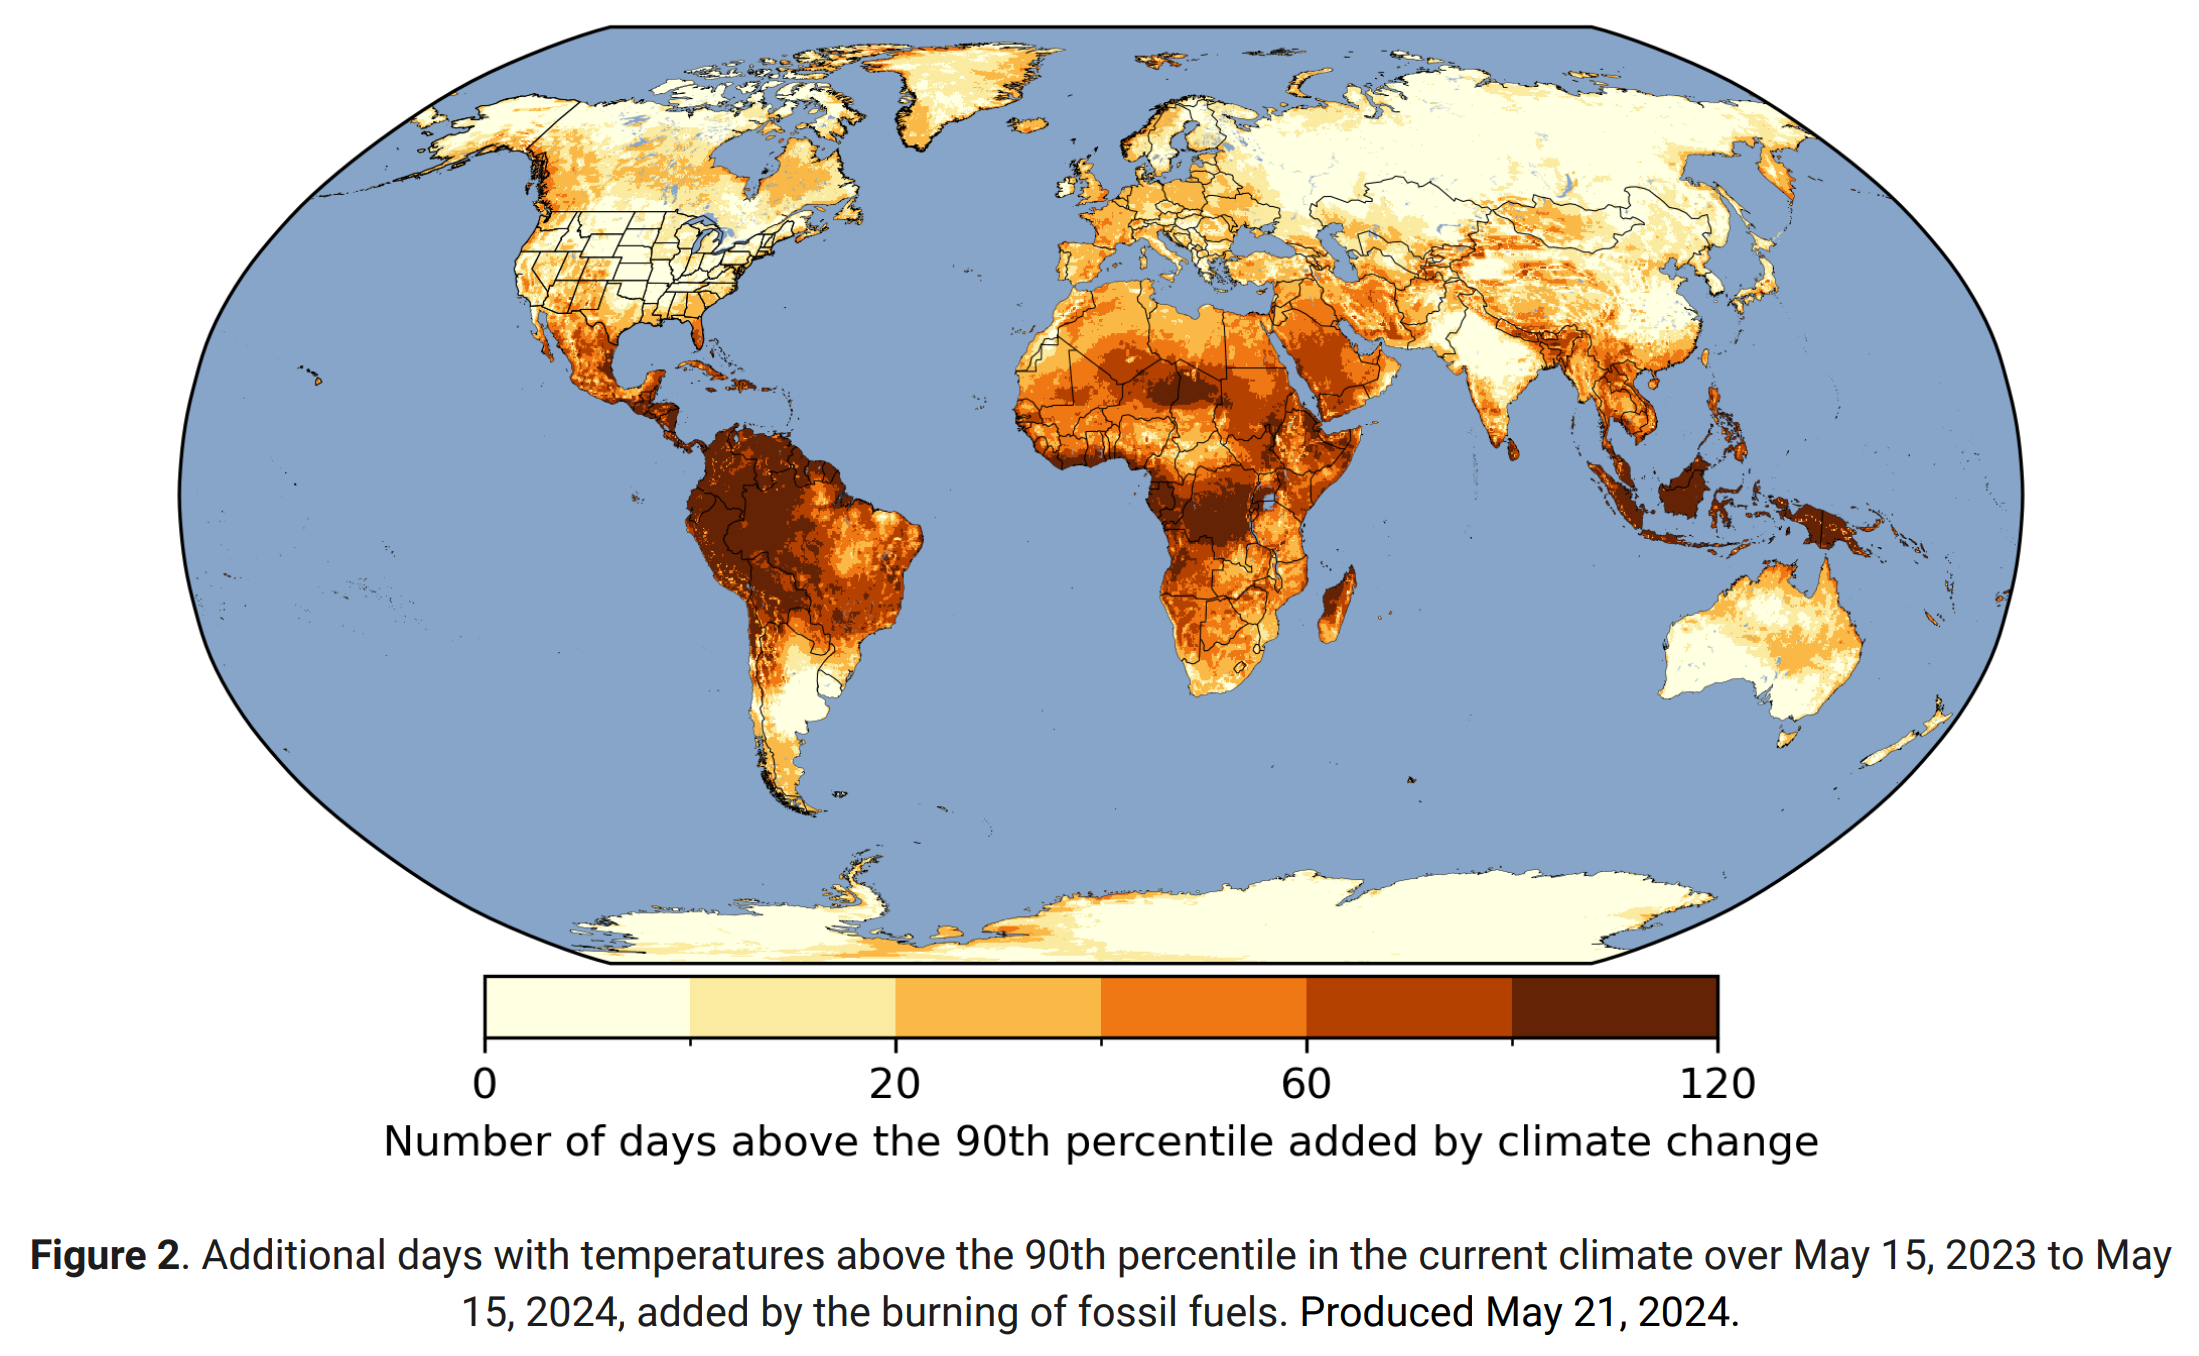 Map showing additional days with temperatures above the 90th percentile in the current climate over 15 May 2023 to 15 May 2024, added by the burning of fossil fuels. Produced 21 May 2024. Graphic: Climate Central